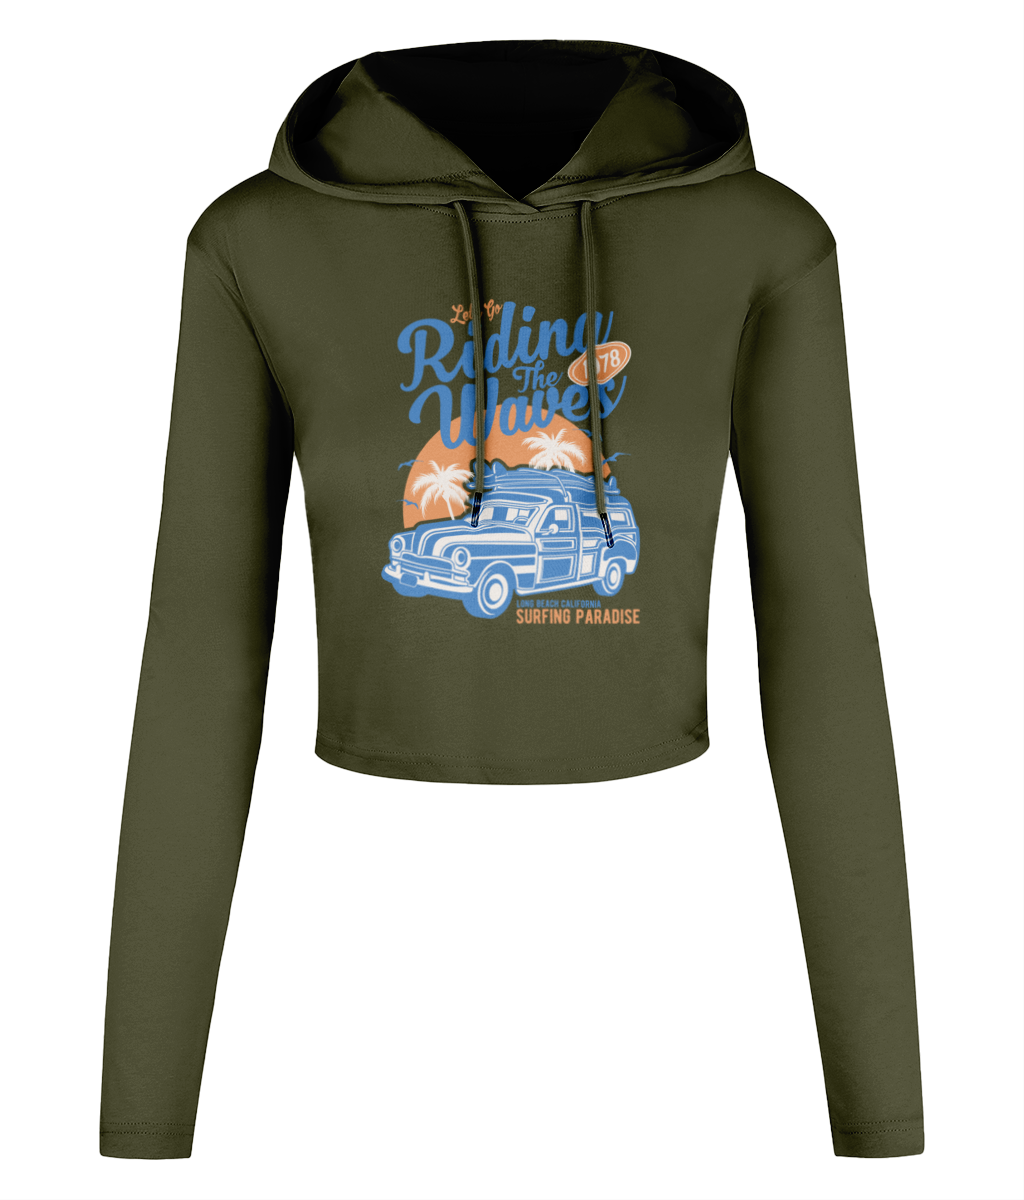 Riding The Waves – Women’s Cropped Hooded T-shirt